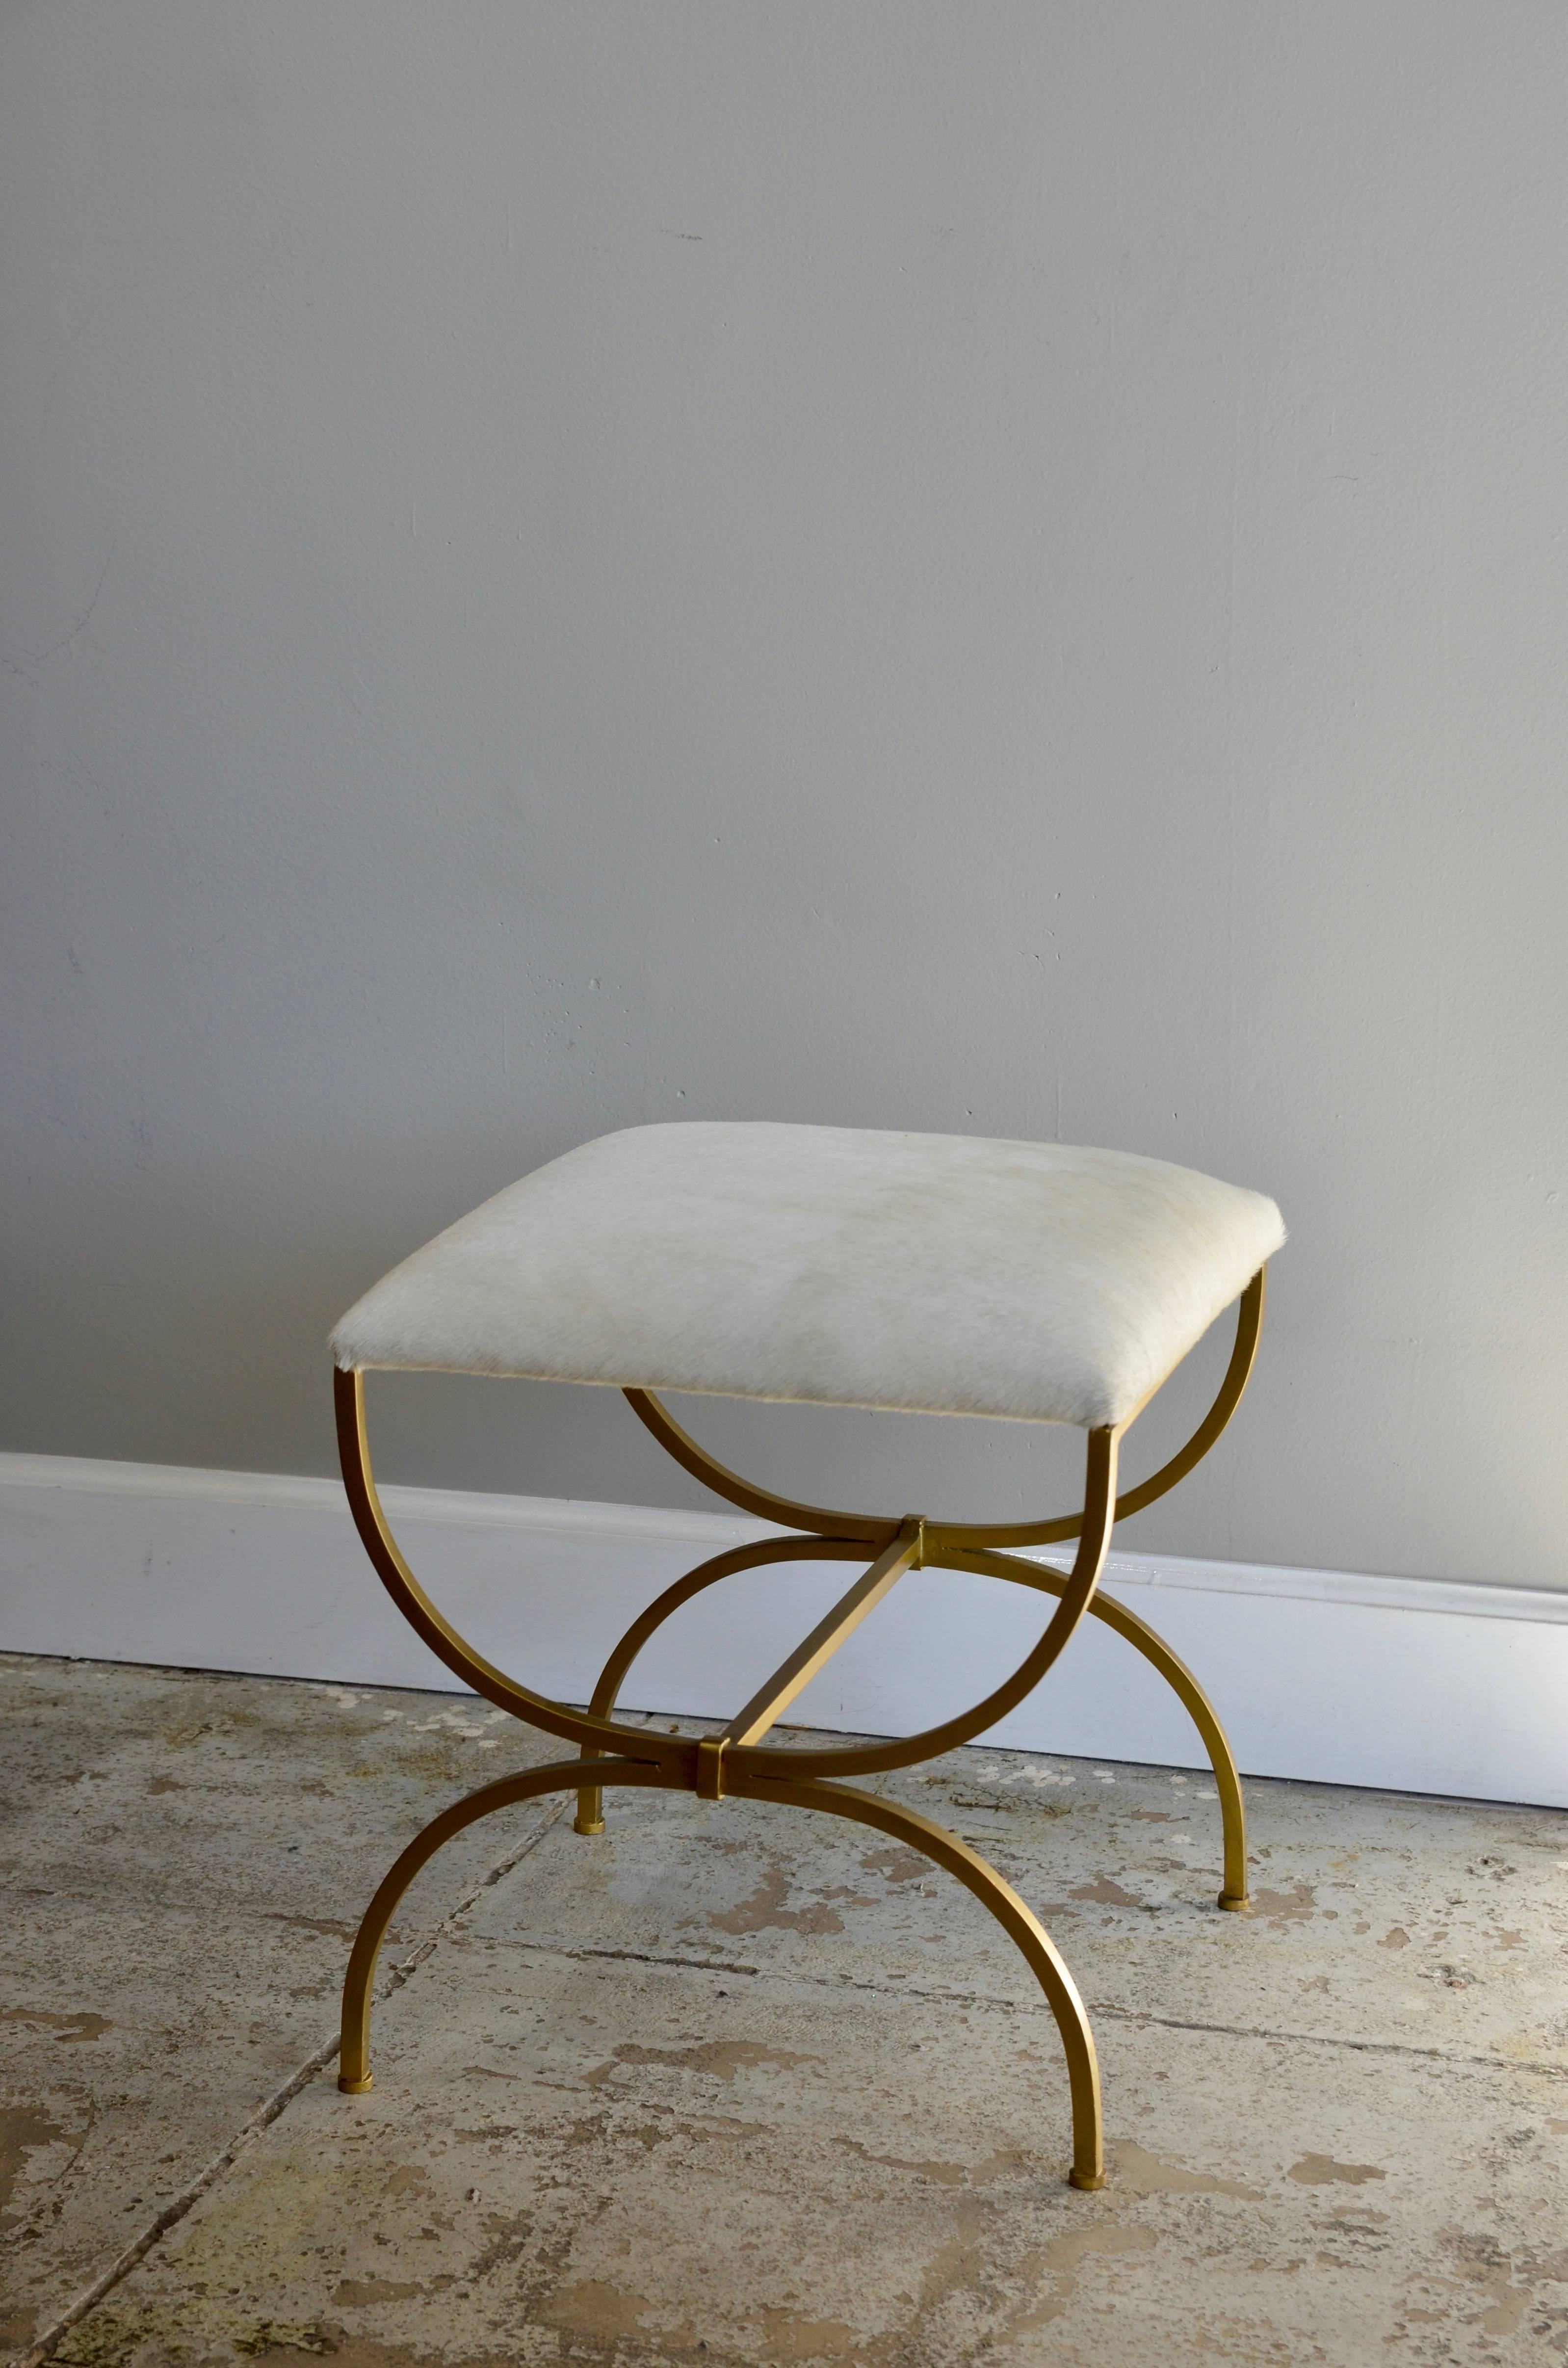 The 'Strapontin' gilt metal and white hide stool by Design Frères.